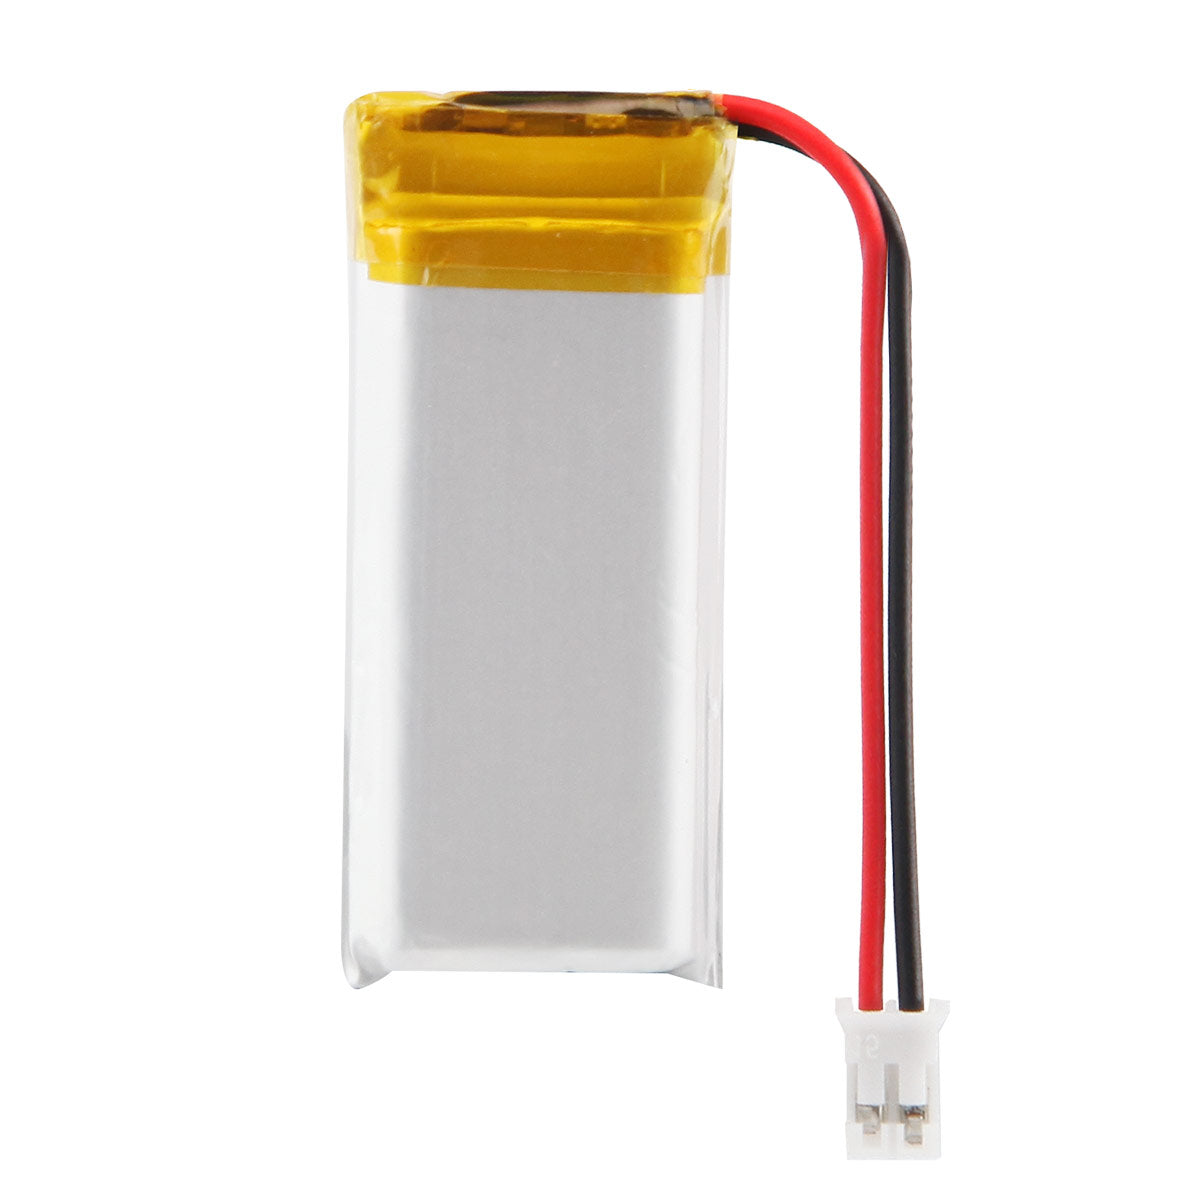 YDL 3.7V 800mAh 752248 Rechargeable Lithium Polymer Battery